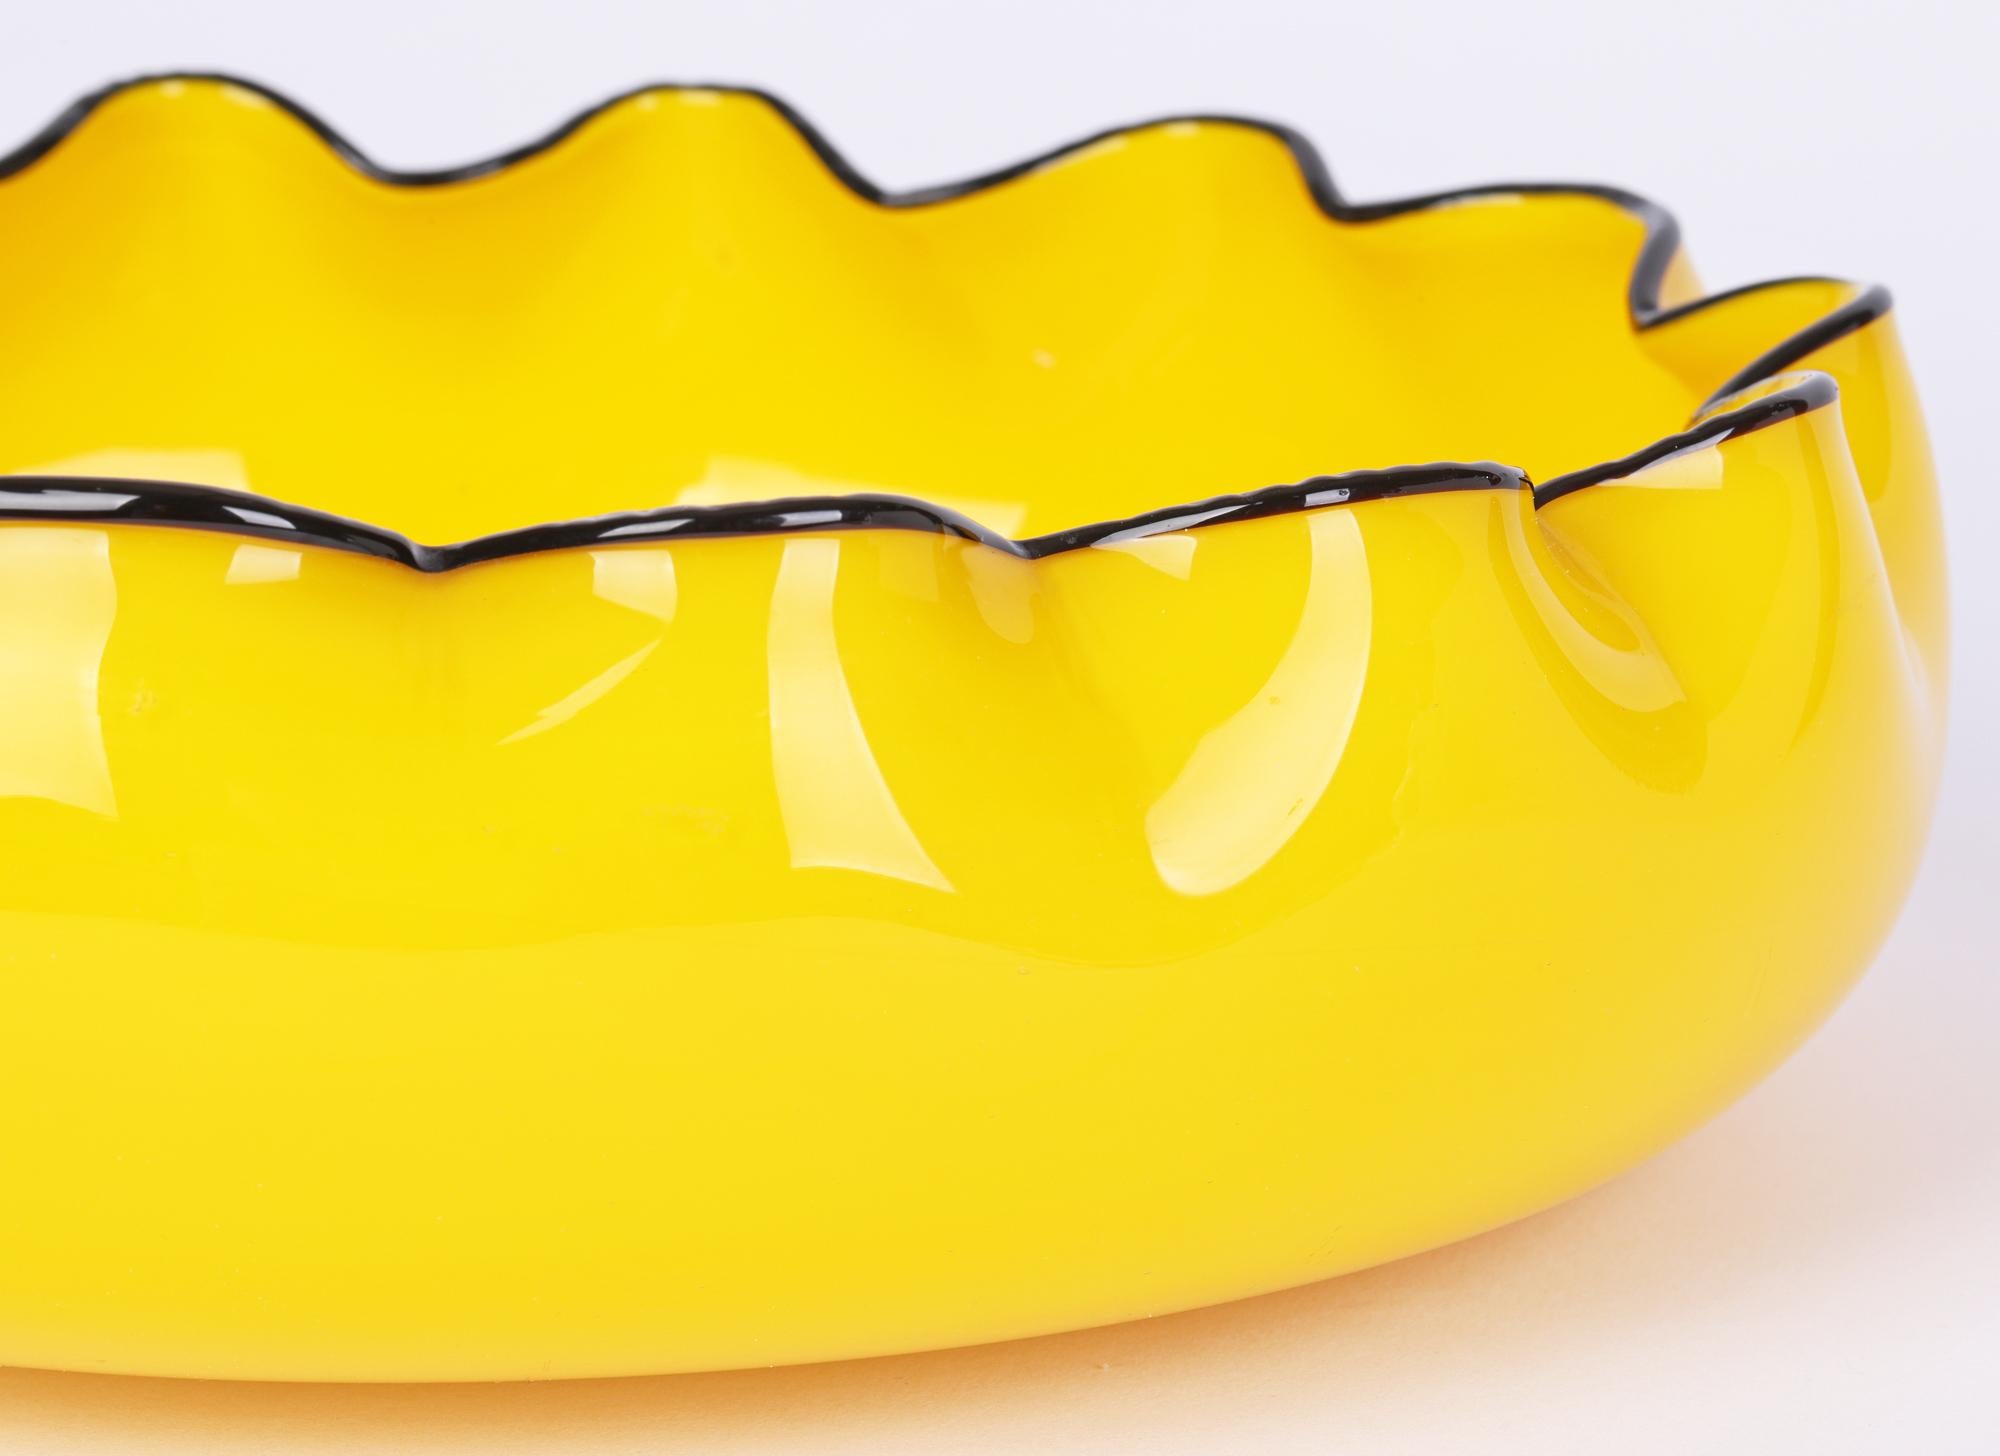 A striking and large Loetz yellow art glass hand-blown bowl piped with a black glass rim by renowned Austrian Sculptor, Ceramist and Designer Michael Powolny (Austrian, 1871-1954) dating from around 1916. 

Michael Powolny produced a number of